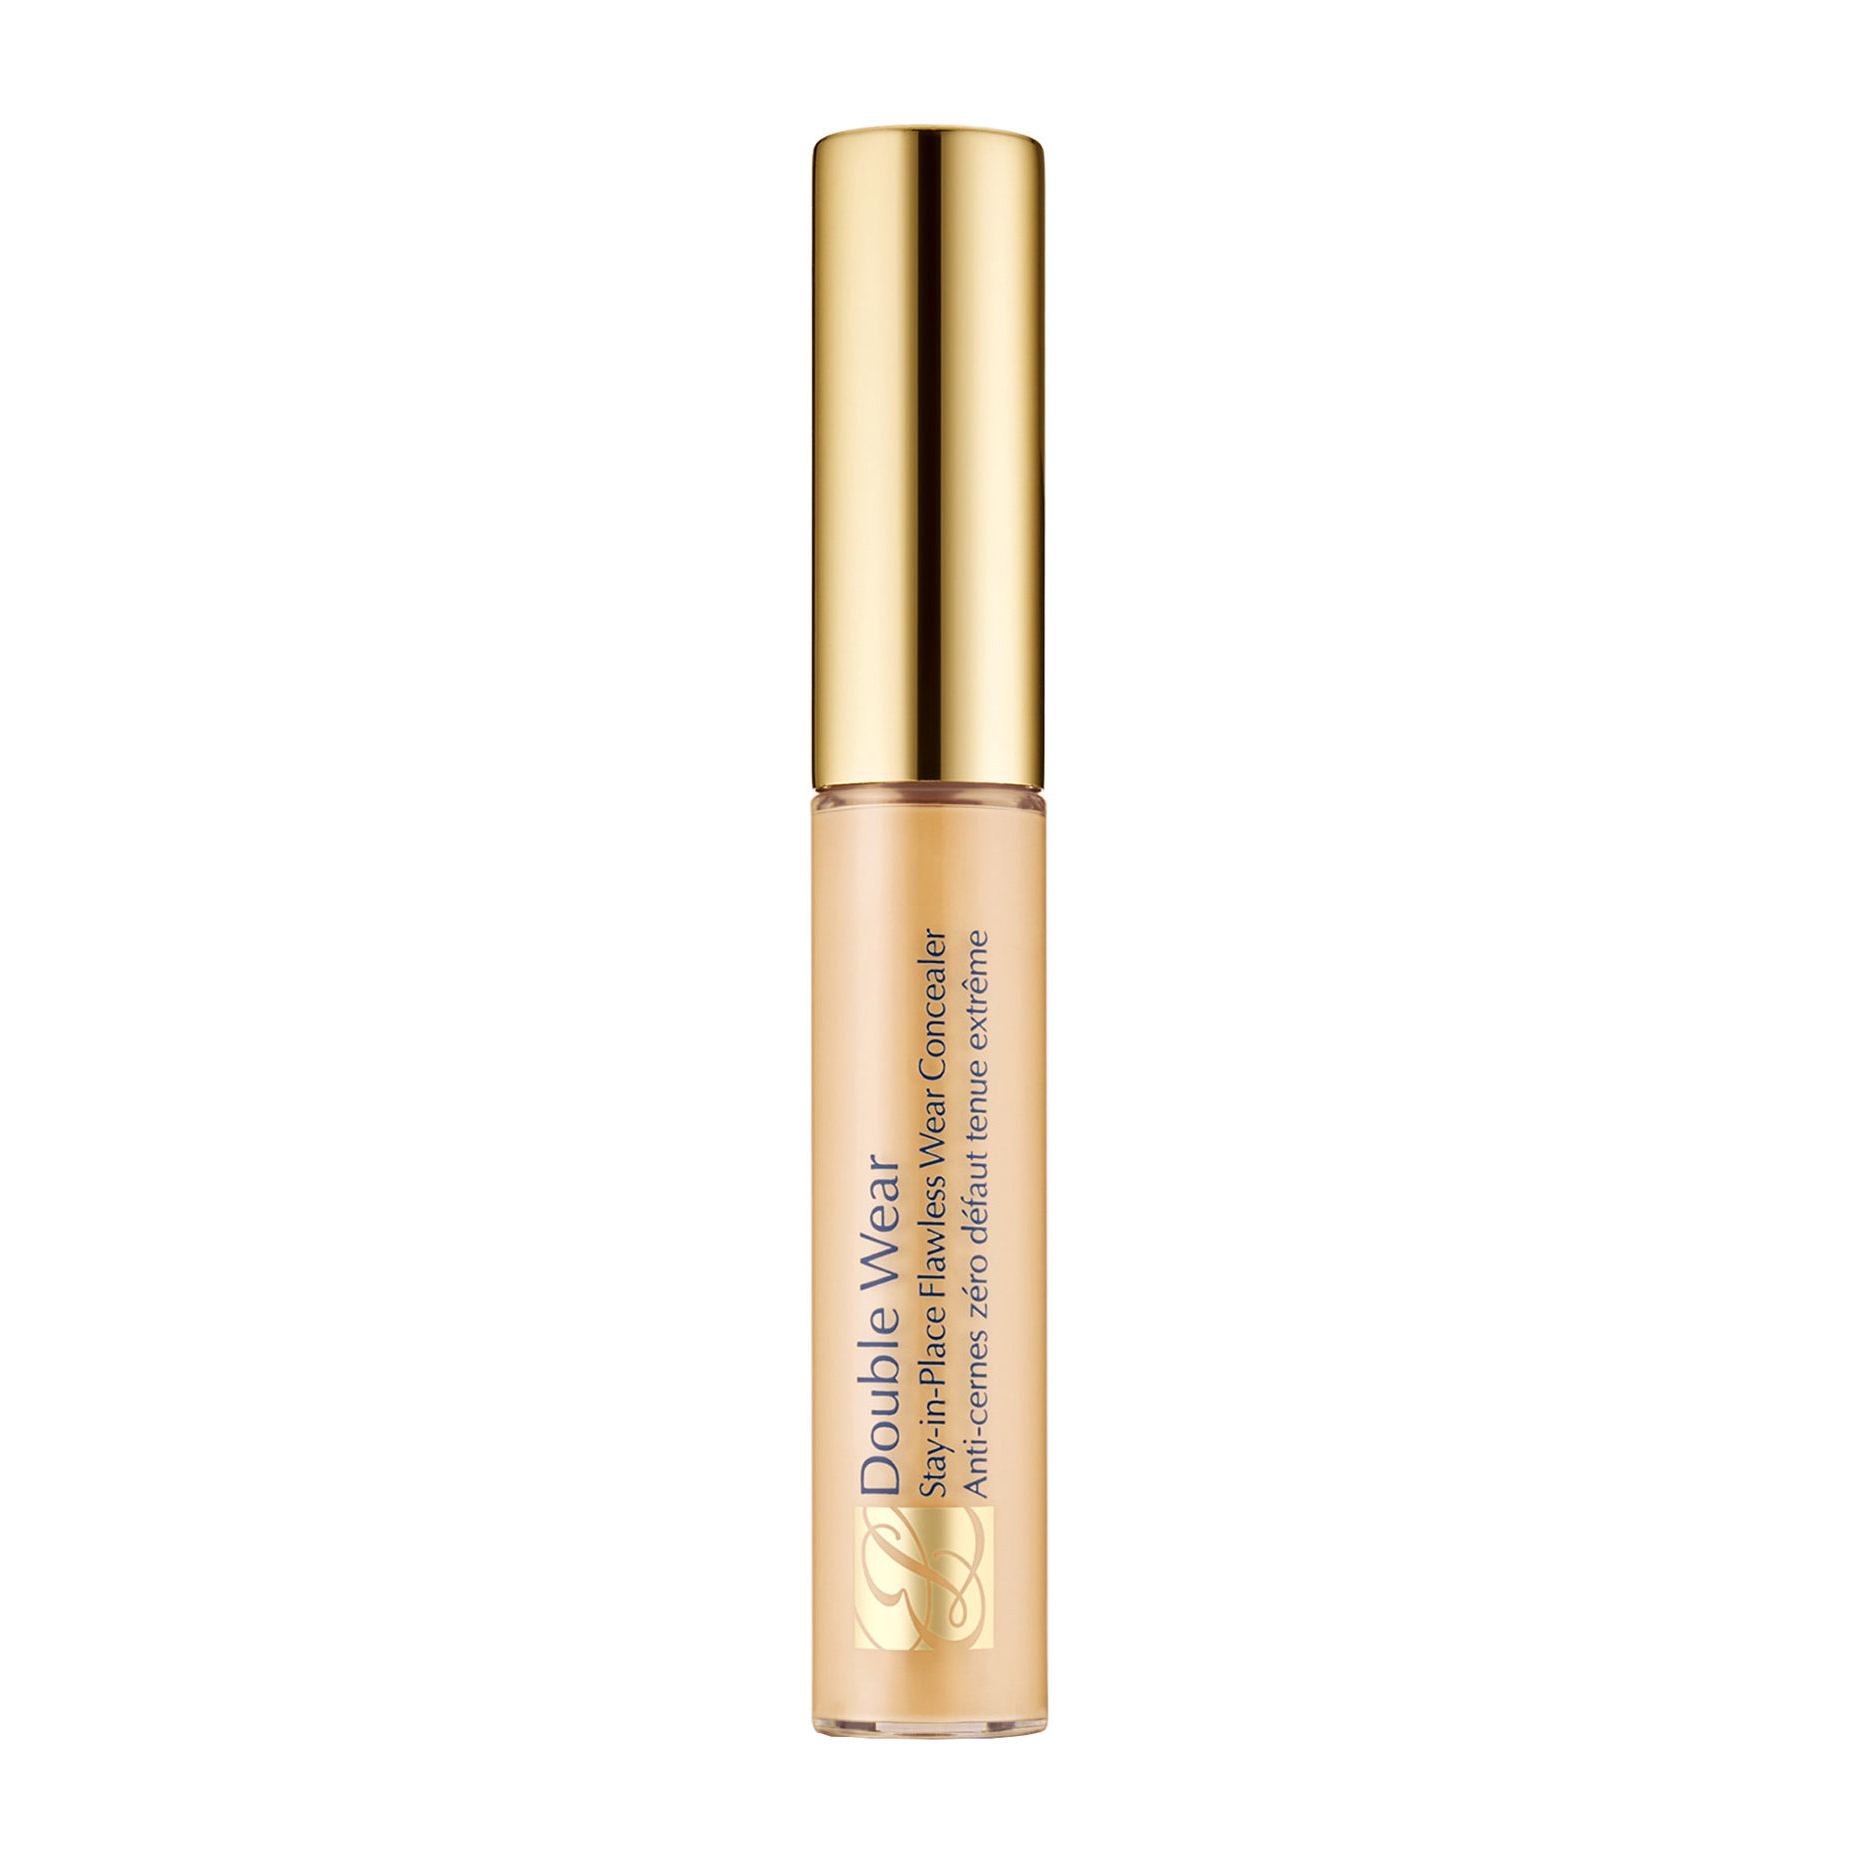 Консилер для лица Estee Lauder Double Wear Stay-In-Place, 1C Light, 7 мл